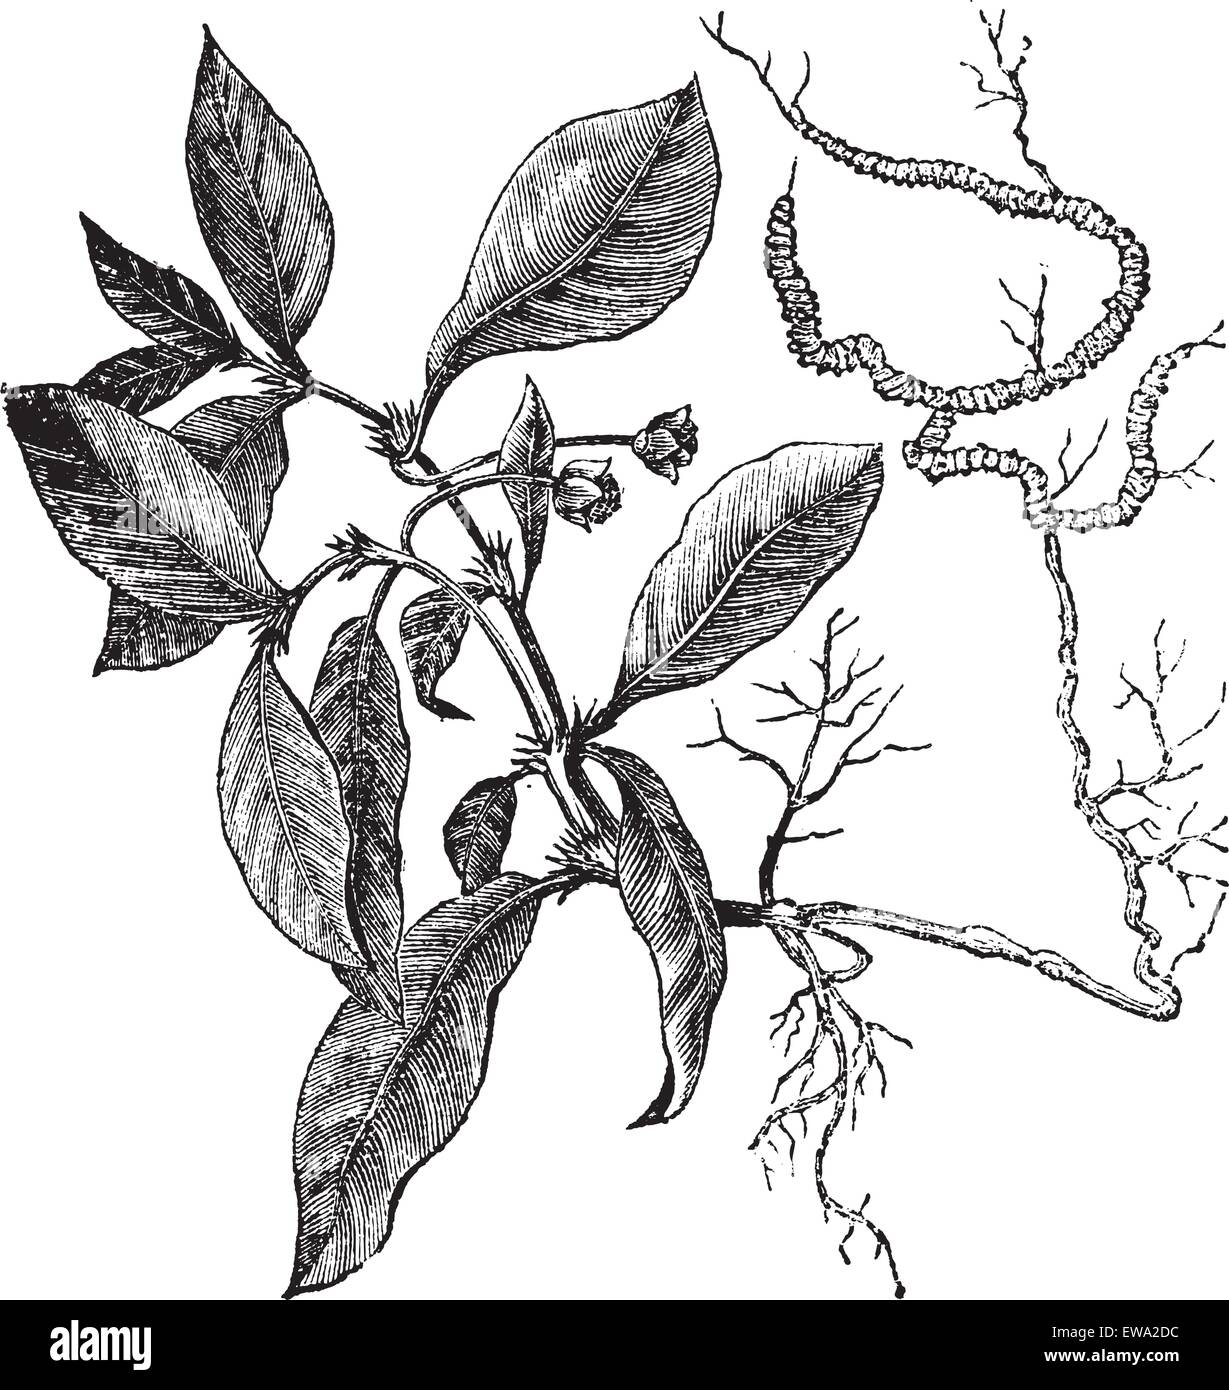 Ipecacuanha or Psychotria ipecacuanha or Callicocca ipecacuanha or Carapichea ipecacuanha or Cephaelis ipecacuanha or Uragoga ipecacuanha or Evea ipecacuanha, vintage engraving. Old engraved illustration of Ipecacuanha with its root isolated on a white background. Stock Vector